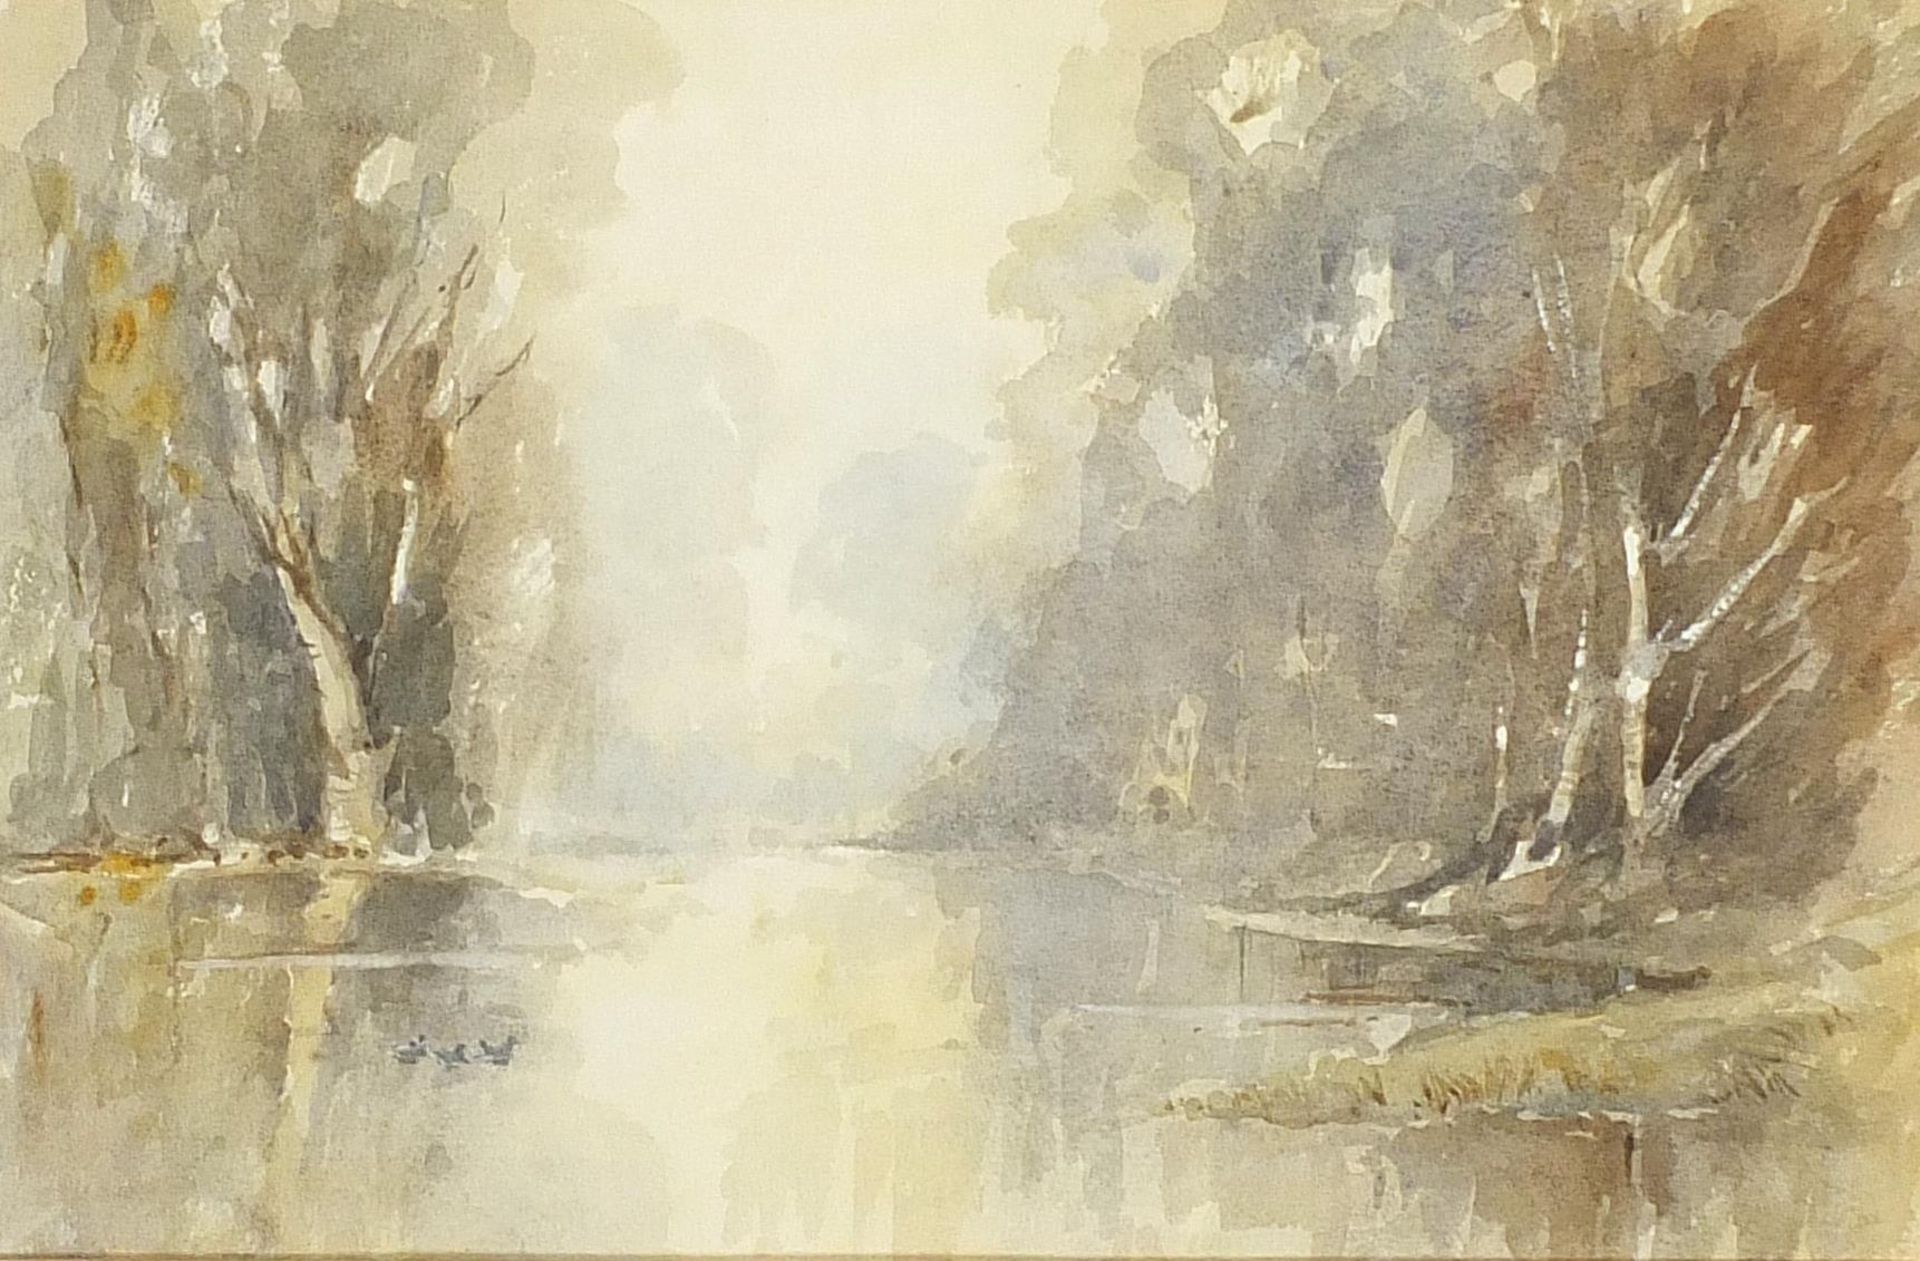 The Lake, Early Morning, watercolour, details verso, mounted, framed and glazed, 46cm x 31cm